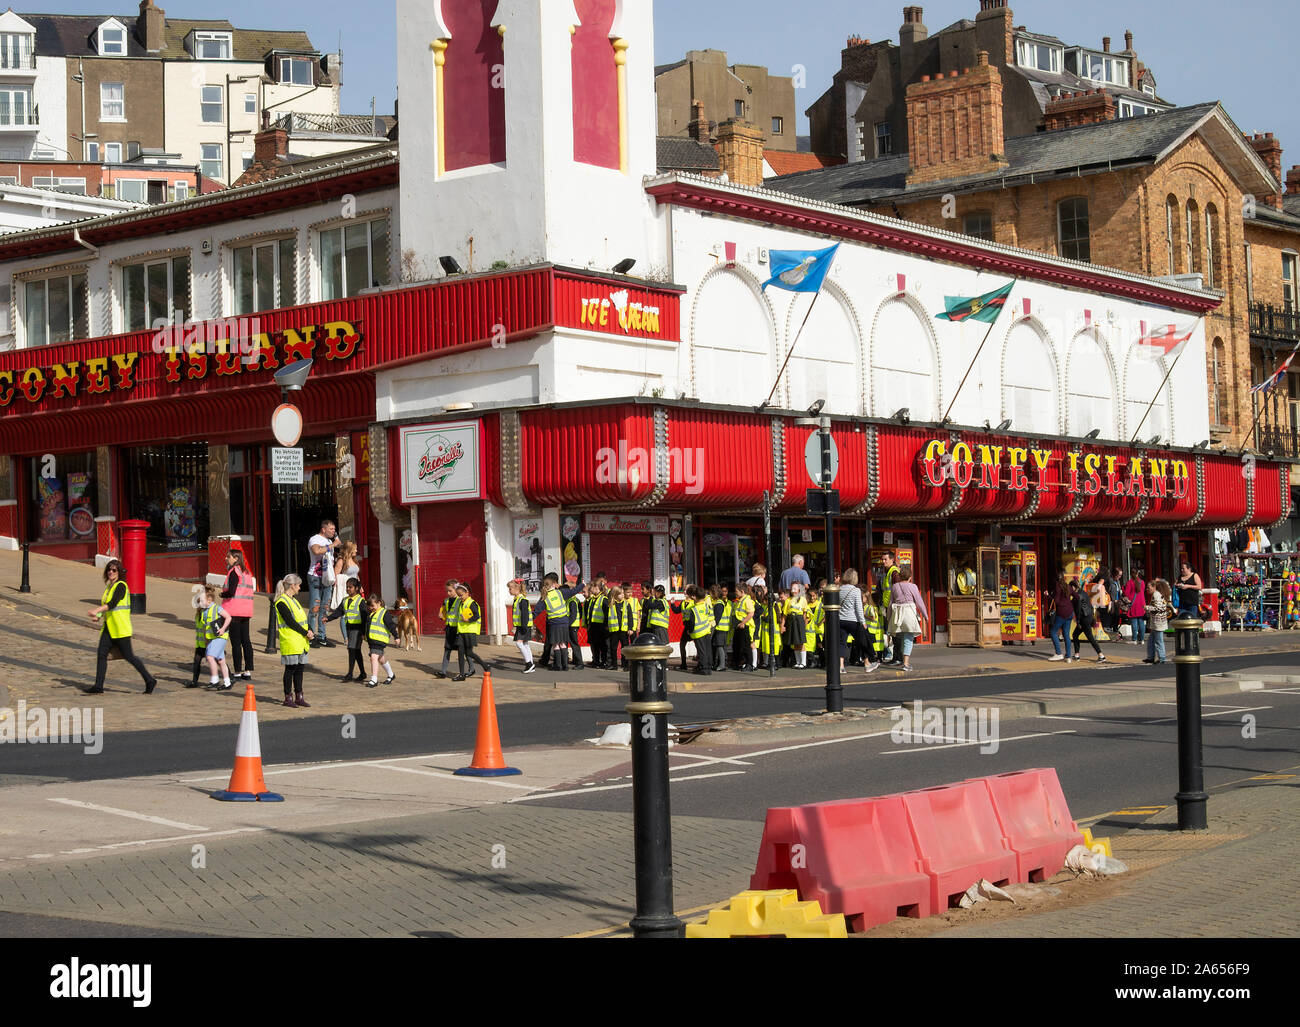 School Children in High Visibility Jackets in a Crocodile Walking Past Coney Island Amusement Centre in Scarborough North Yorkshire England UK Stock Photo